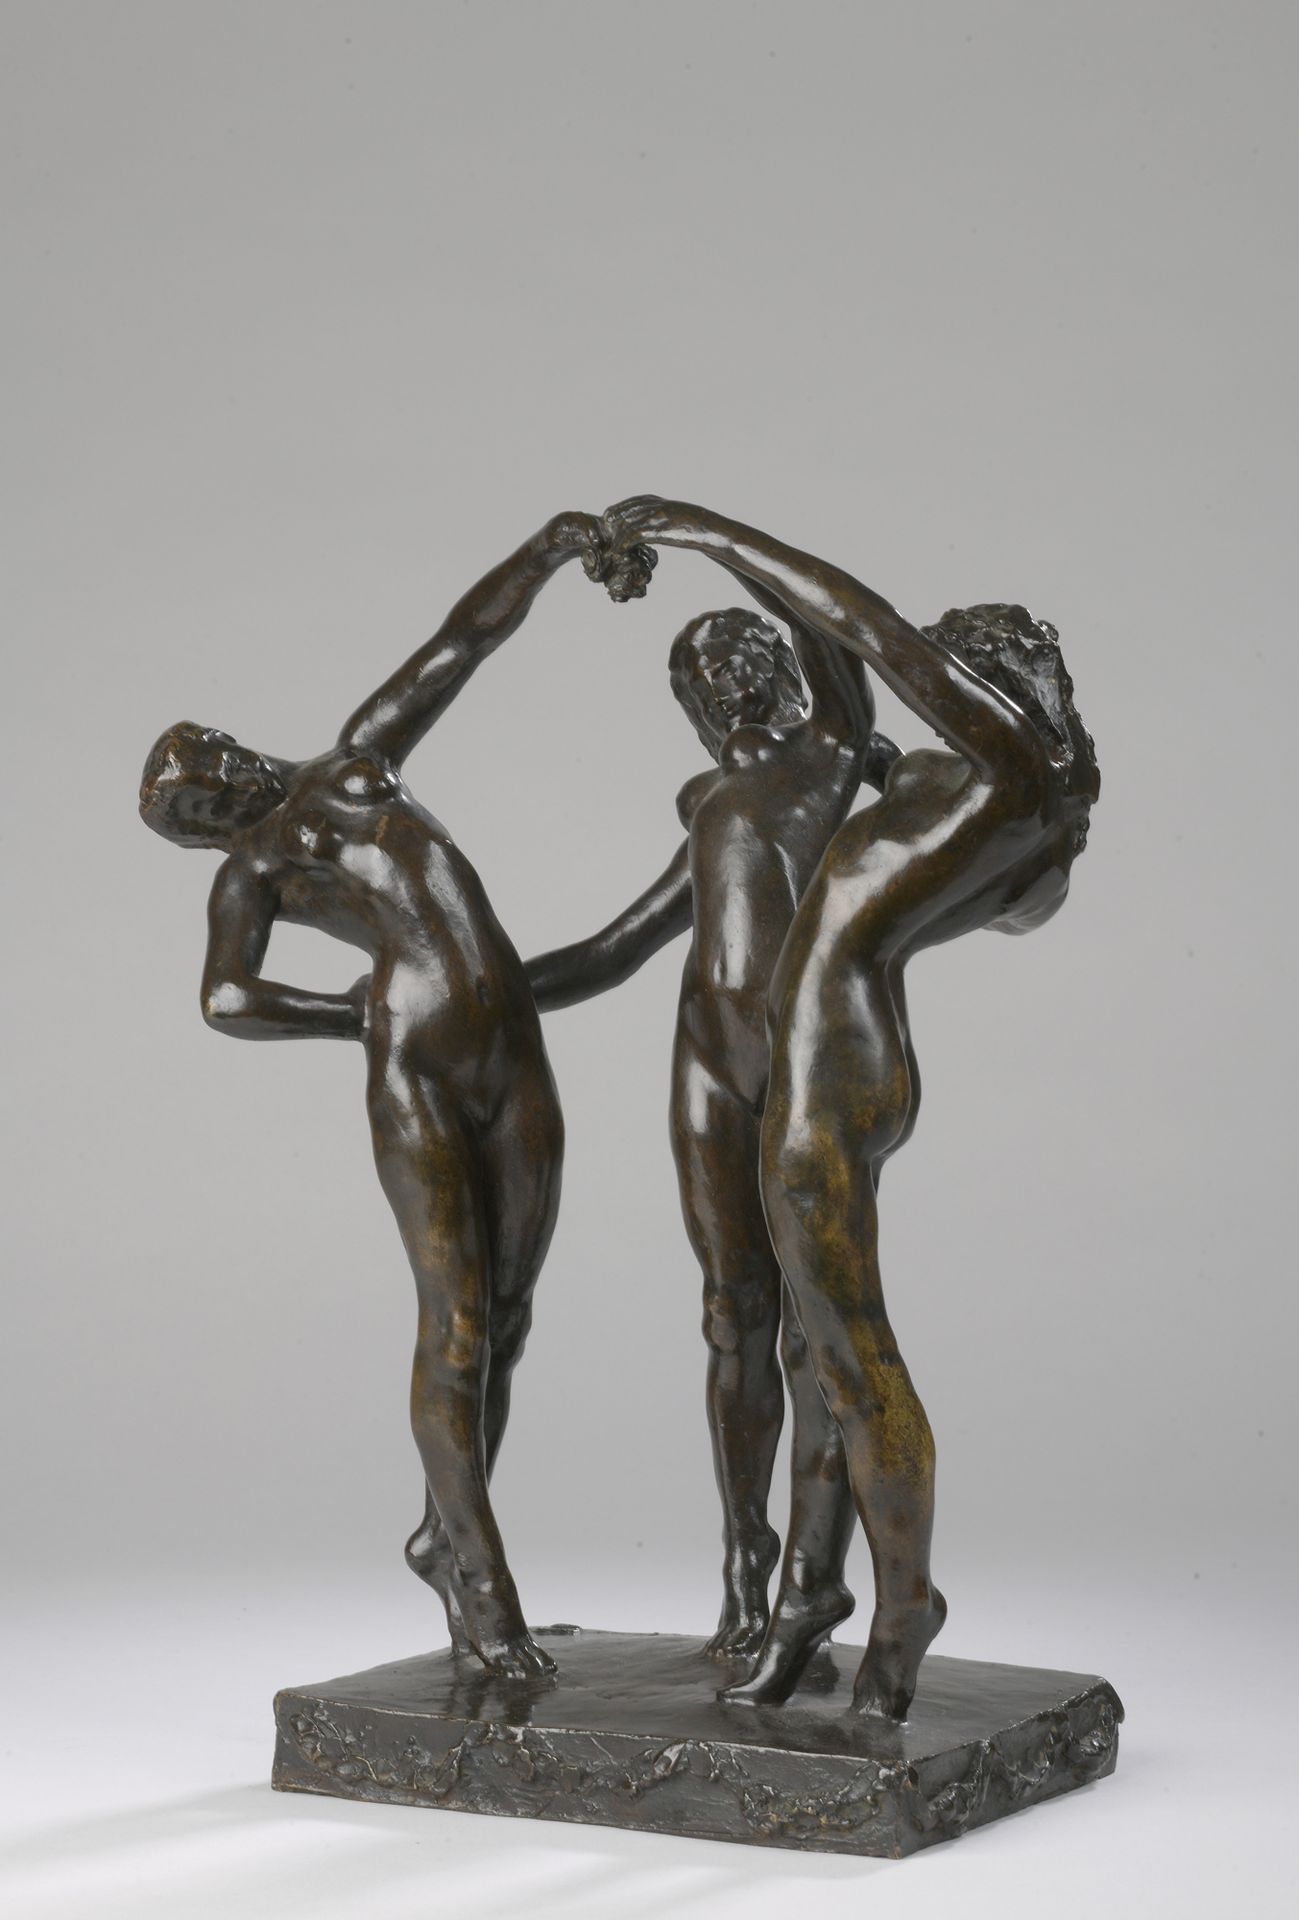 Null Joseph BERNARD (1866-1931)

Dance of the roses

Bronze with brown patina.

&hellip;